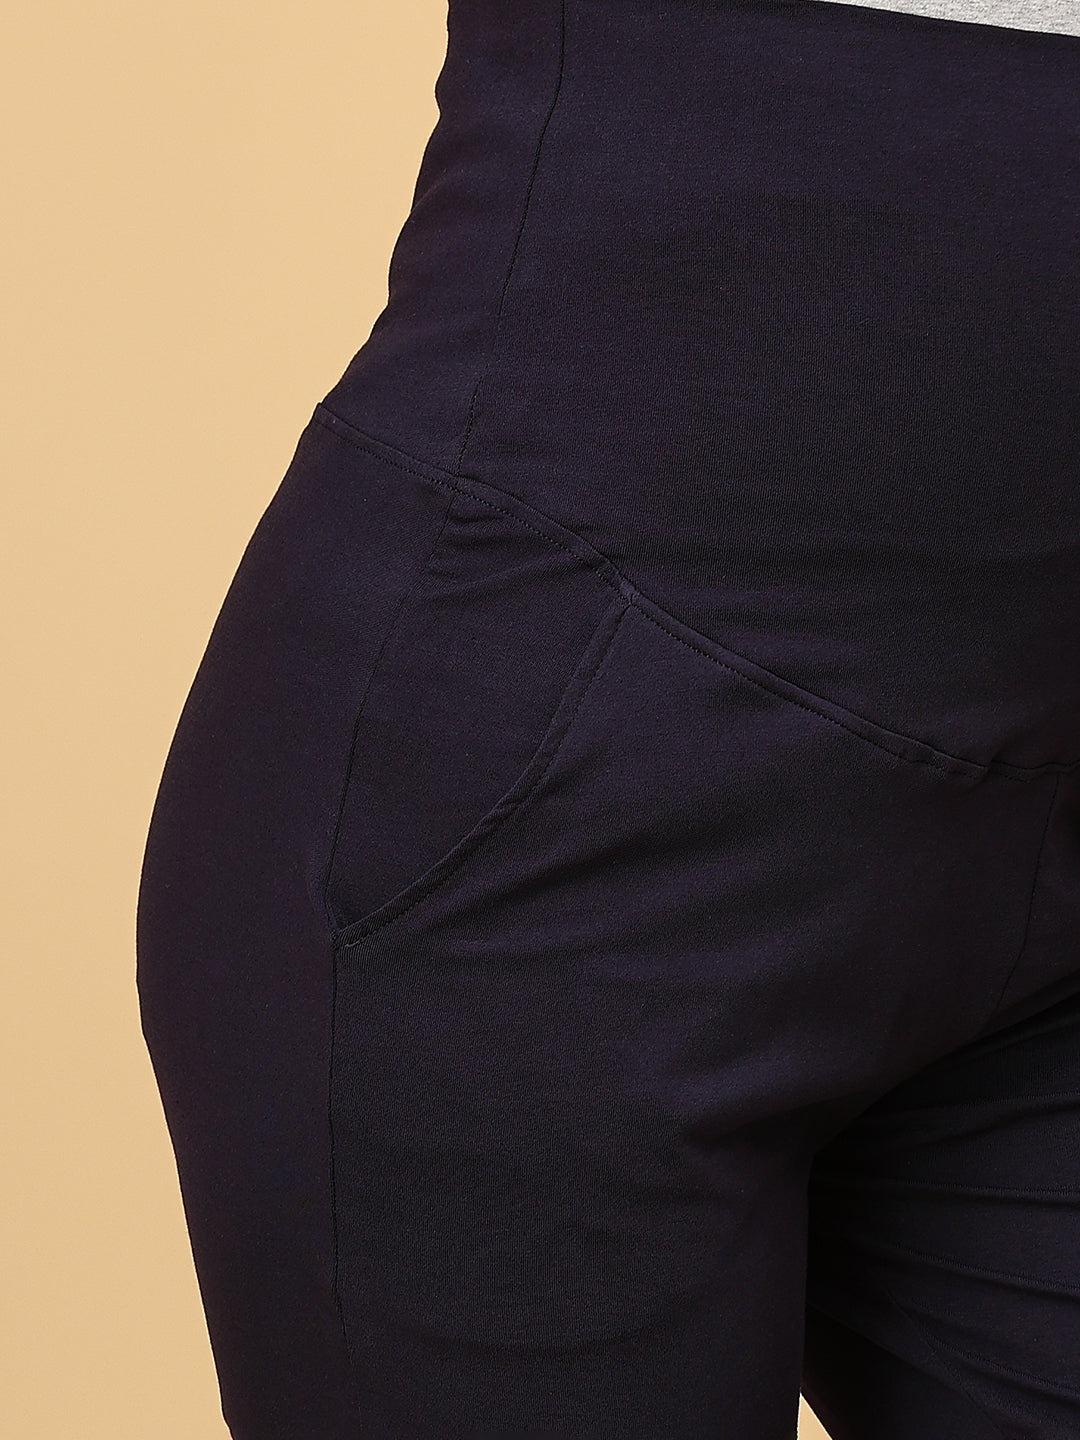 Comfy Maternity Trackpants - Navy Blue